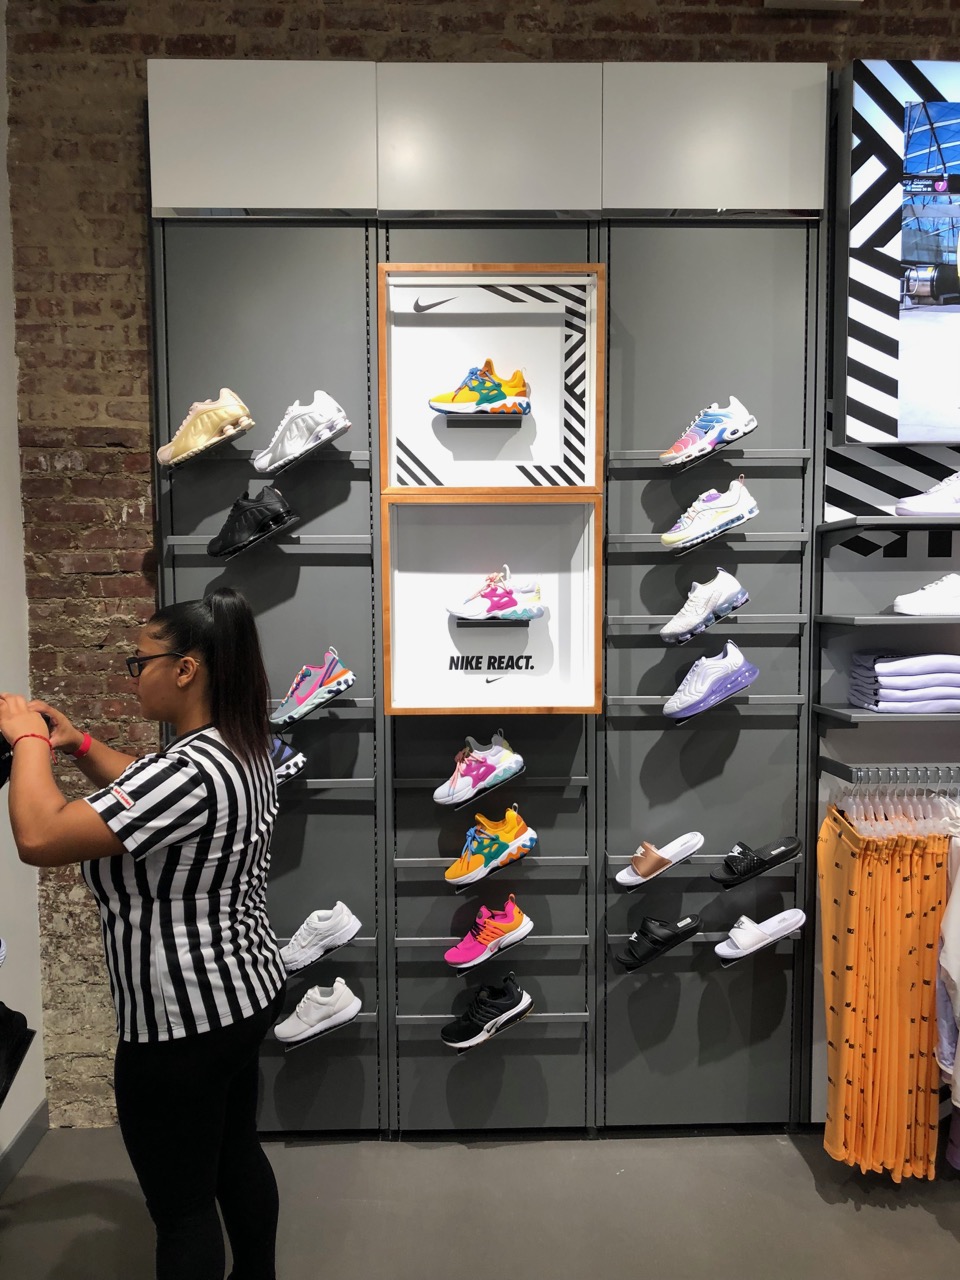 Nike To Pull Its Product From Locker & Other Major Retailers